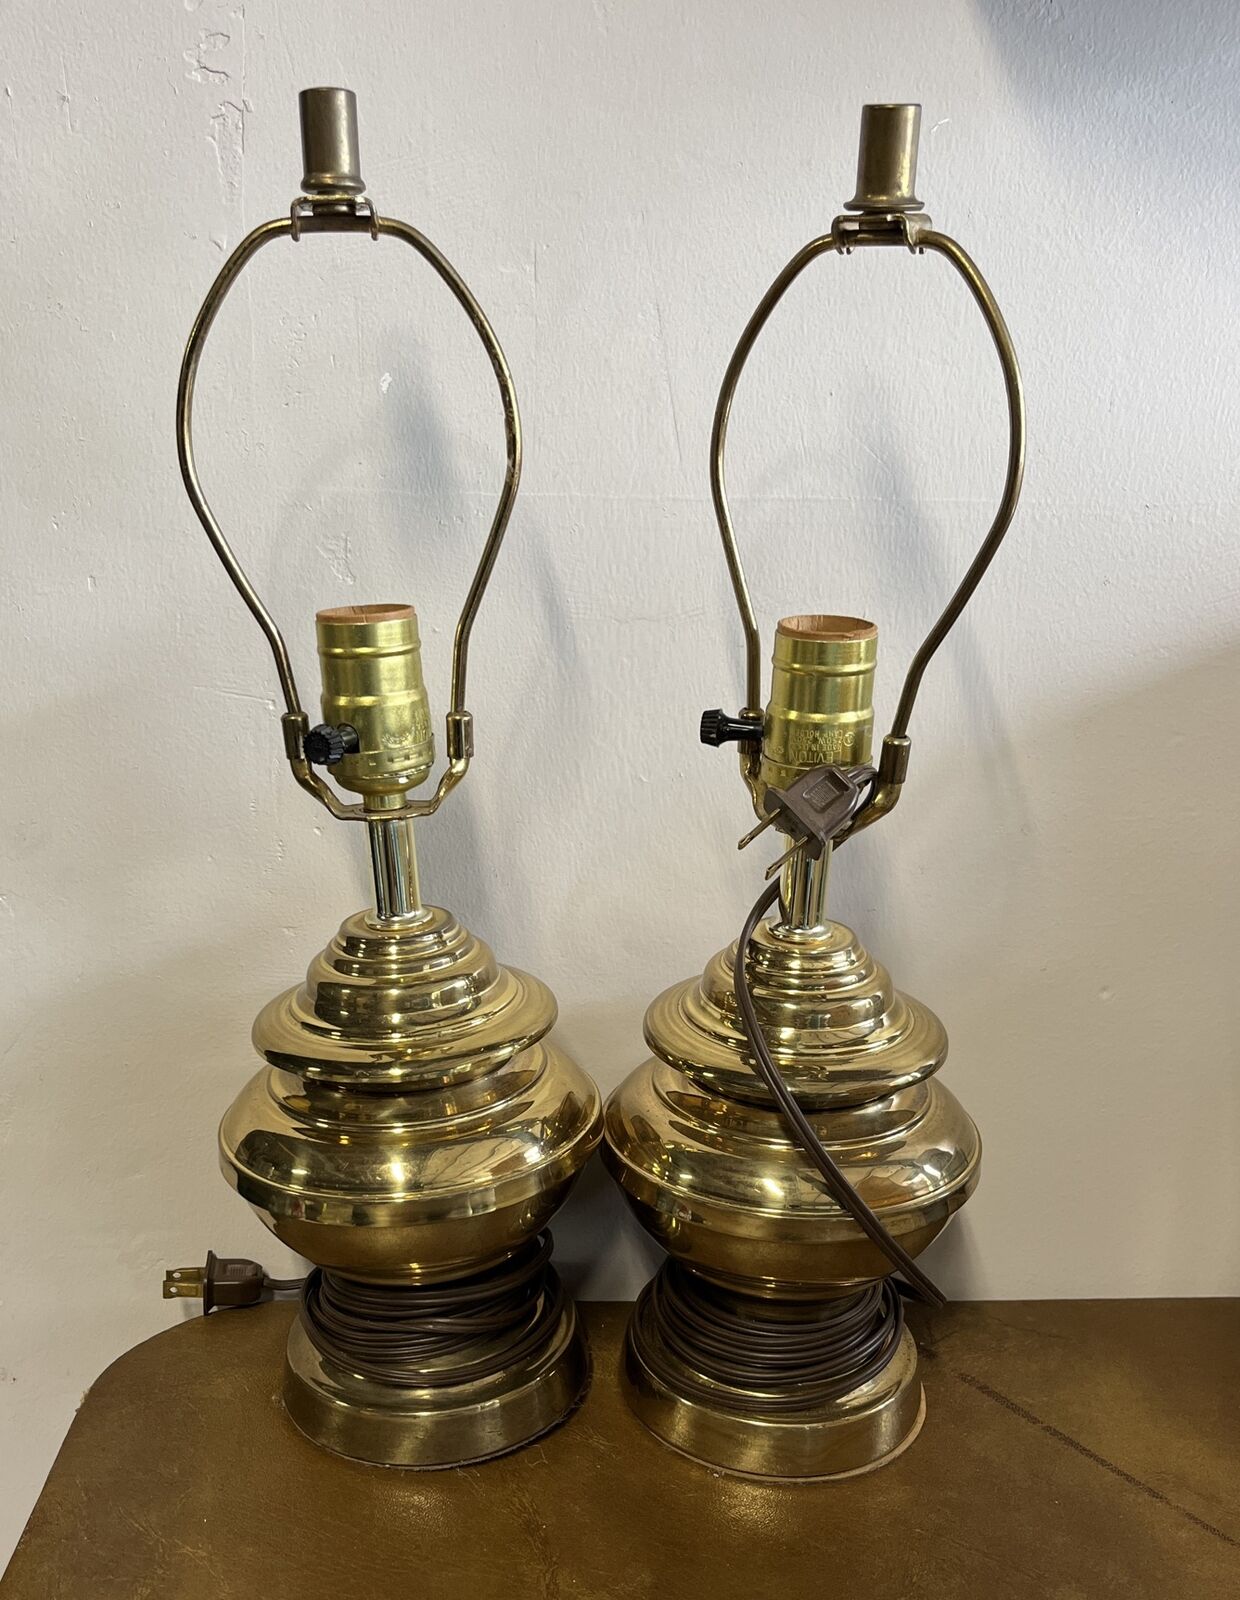 70s  leviton Brass Lamps living room bedroom lamps nightstand end table vintage